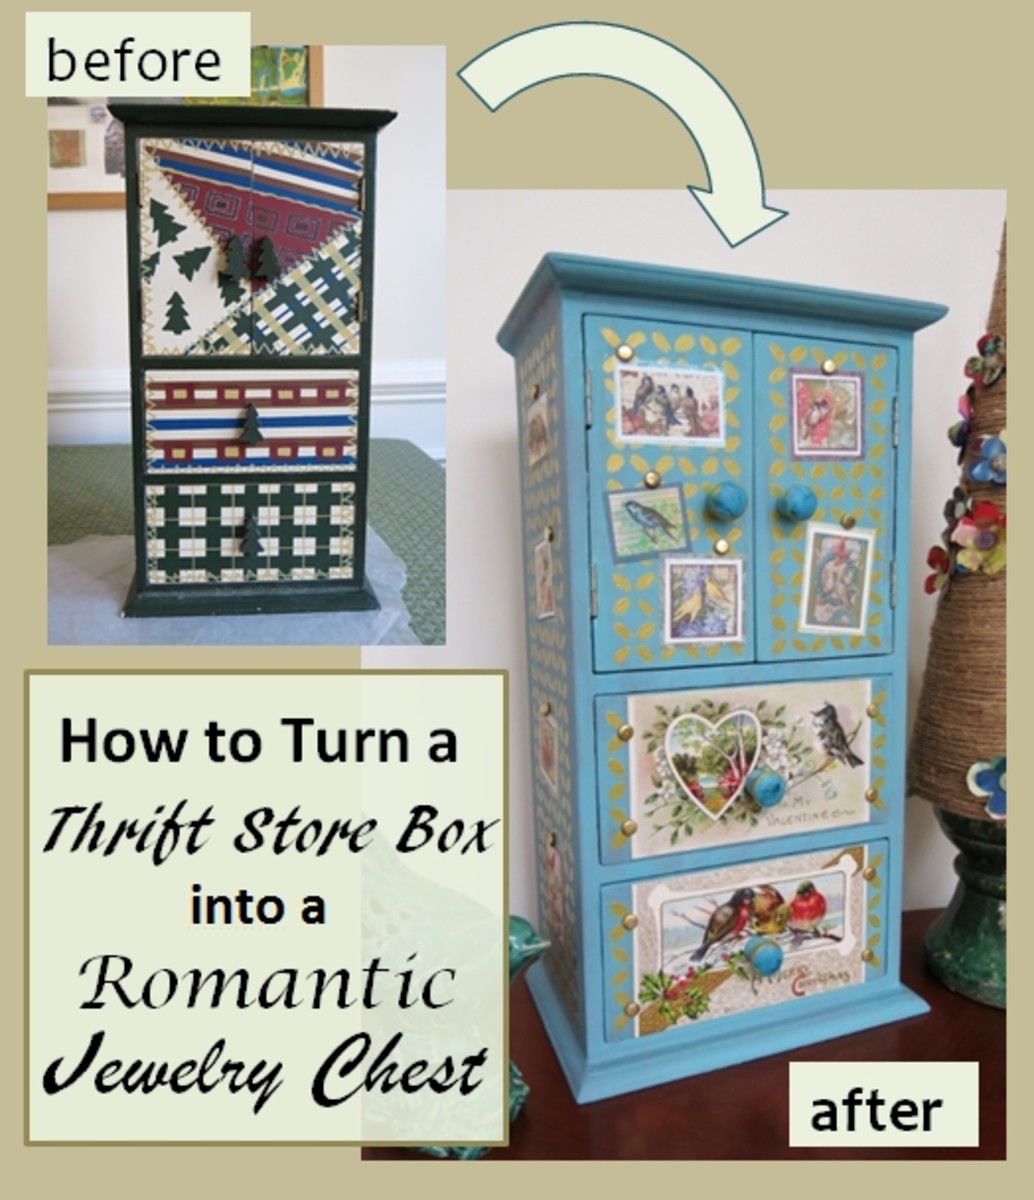 Learn how to recycle an old box into a beautiful jewelry case!